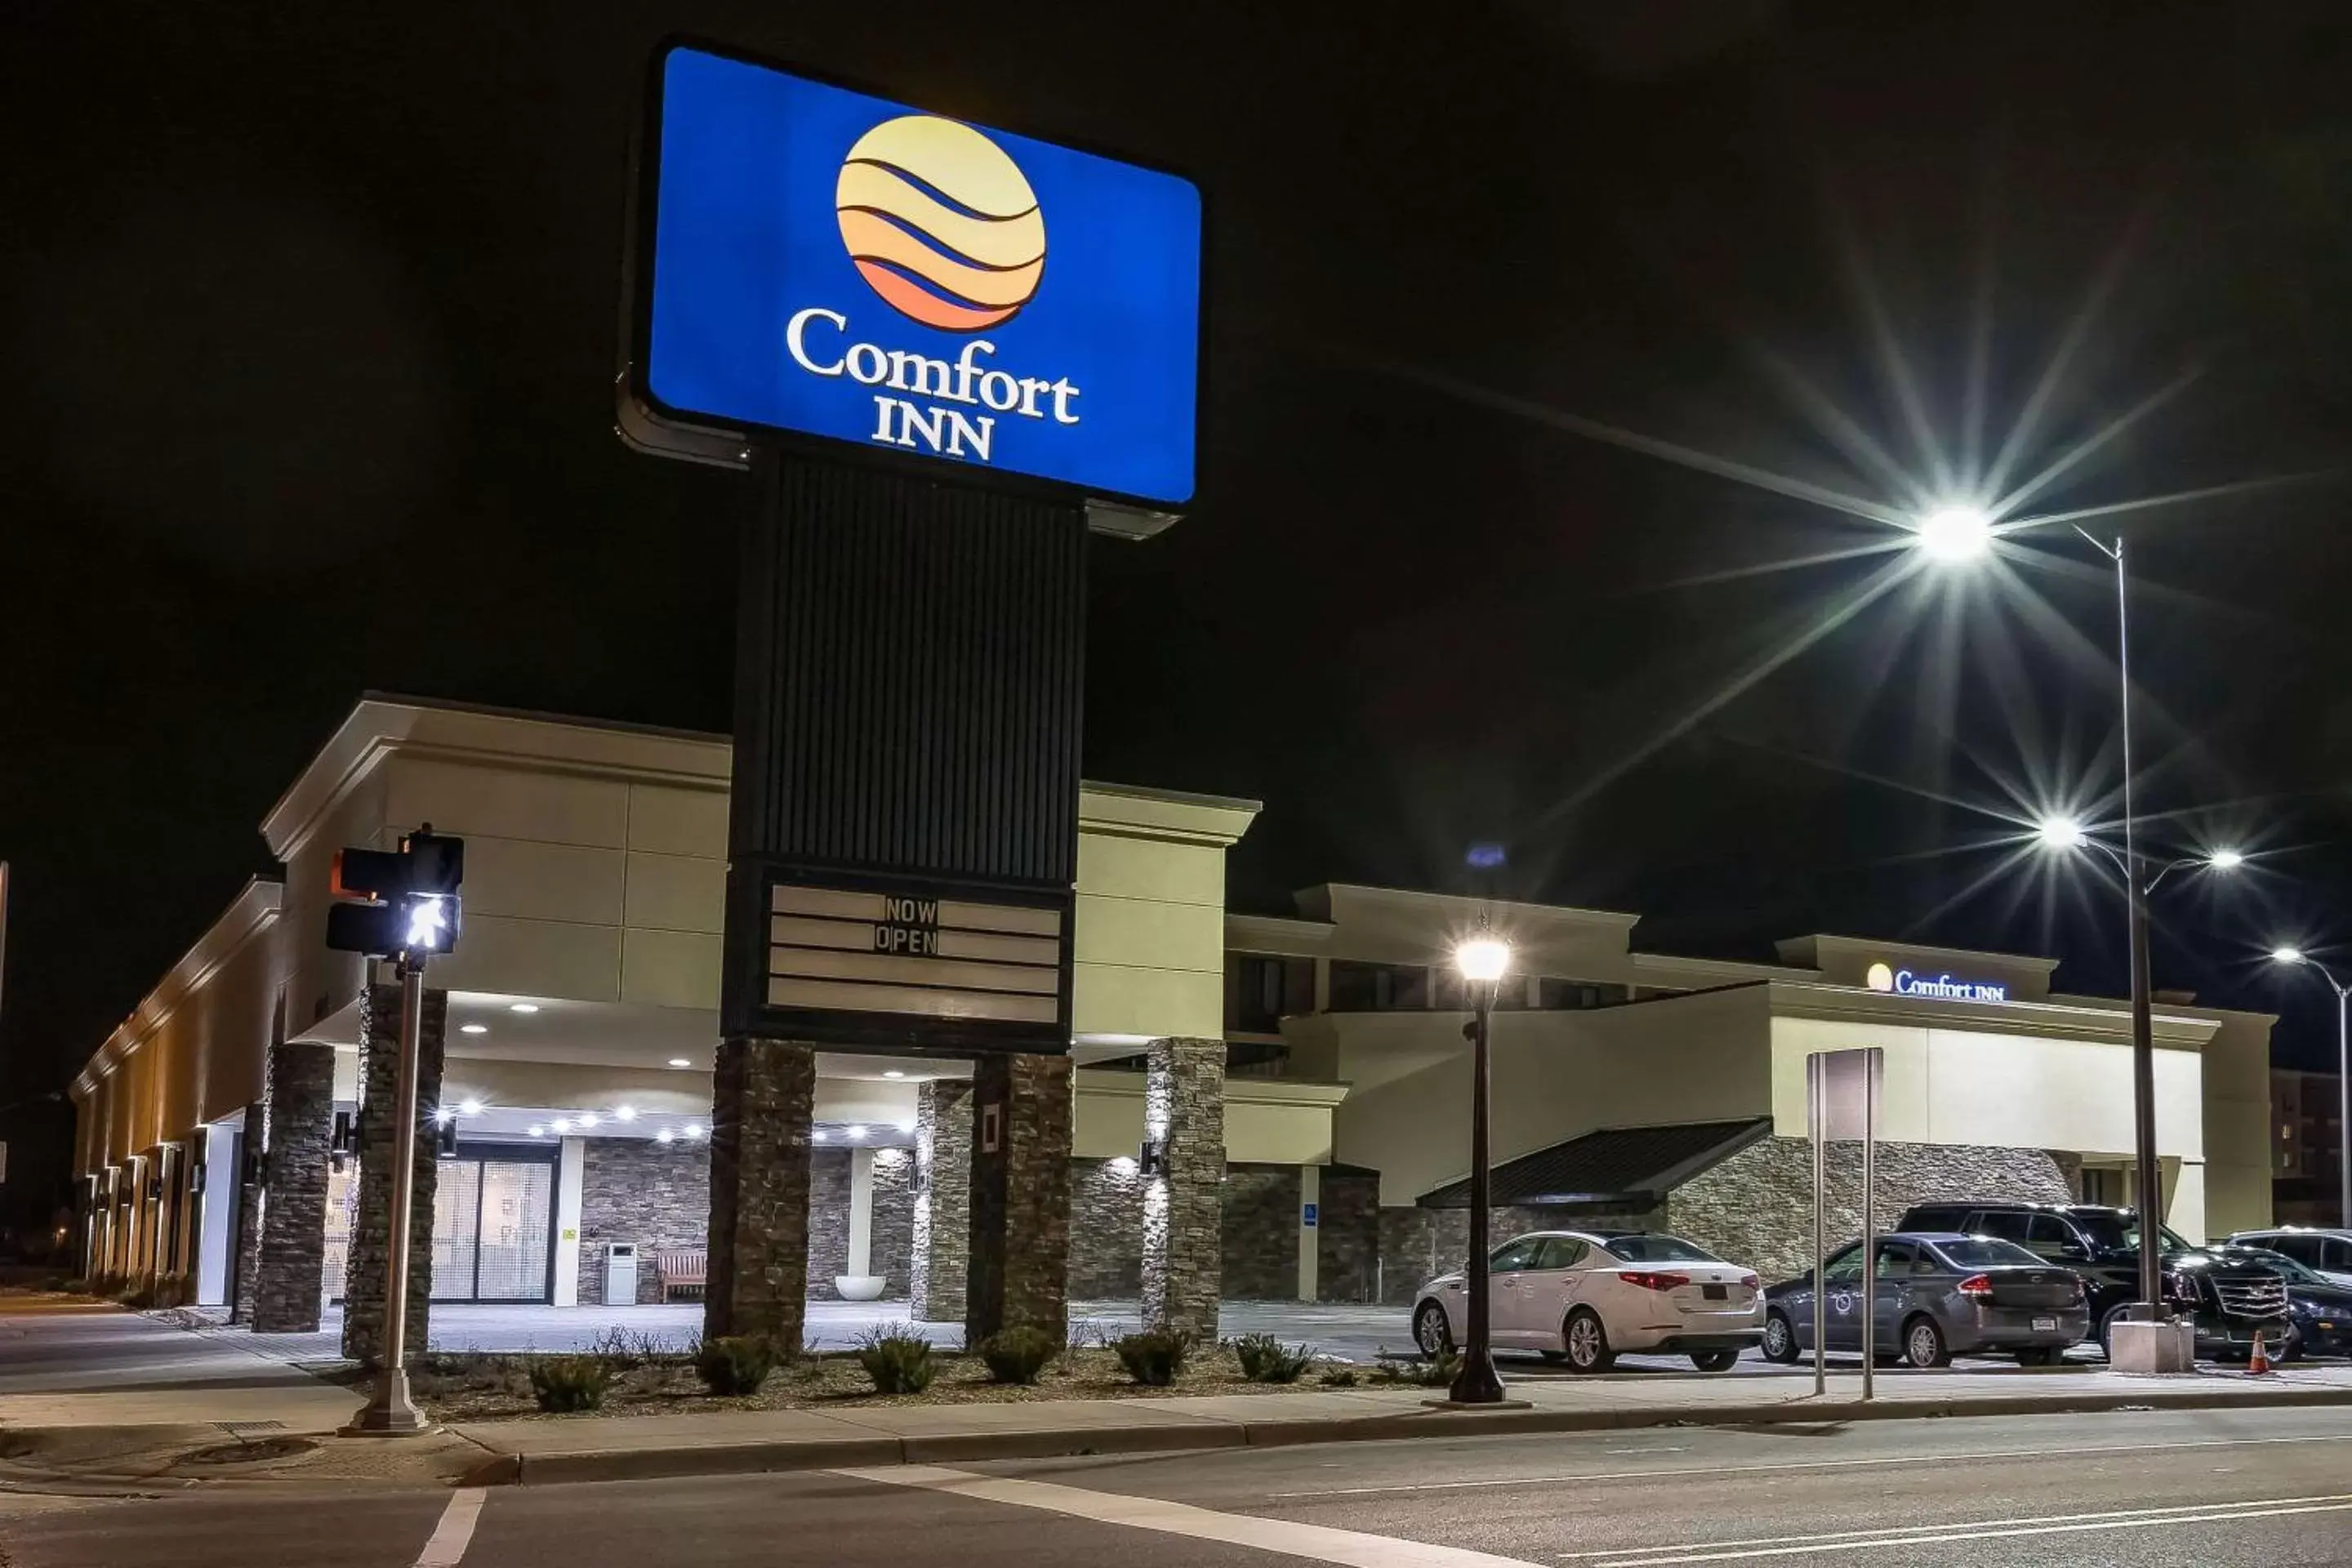 Property Building in Comfort Inn Bay City - Riverfront